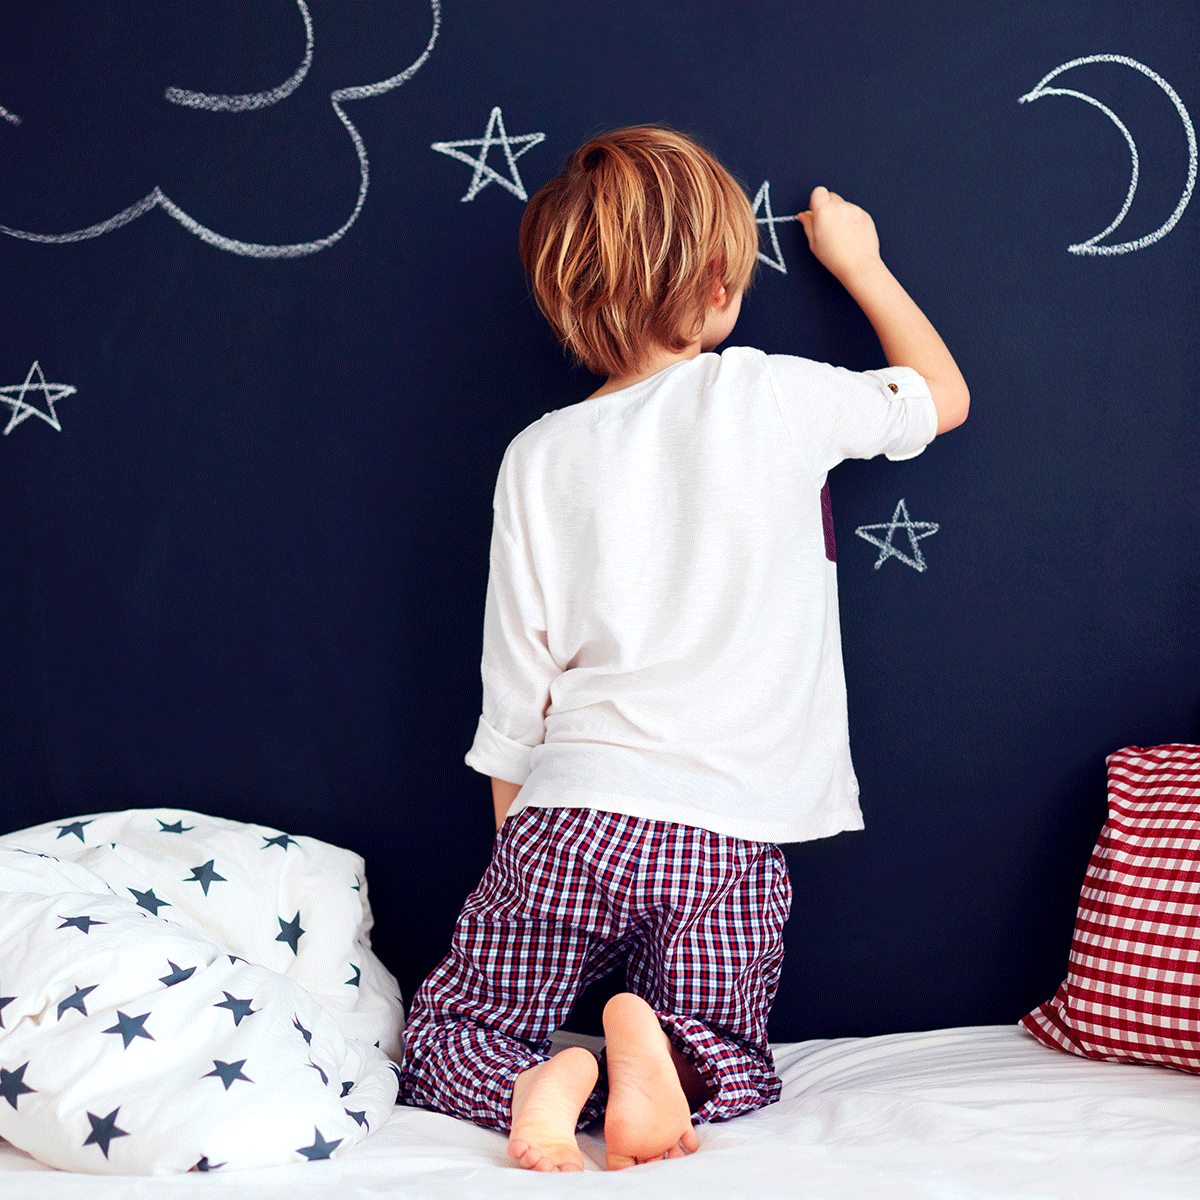 How to Decorate with Chalkboard Paint - 5 Creative Ideas